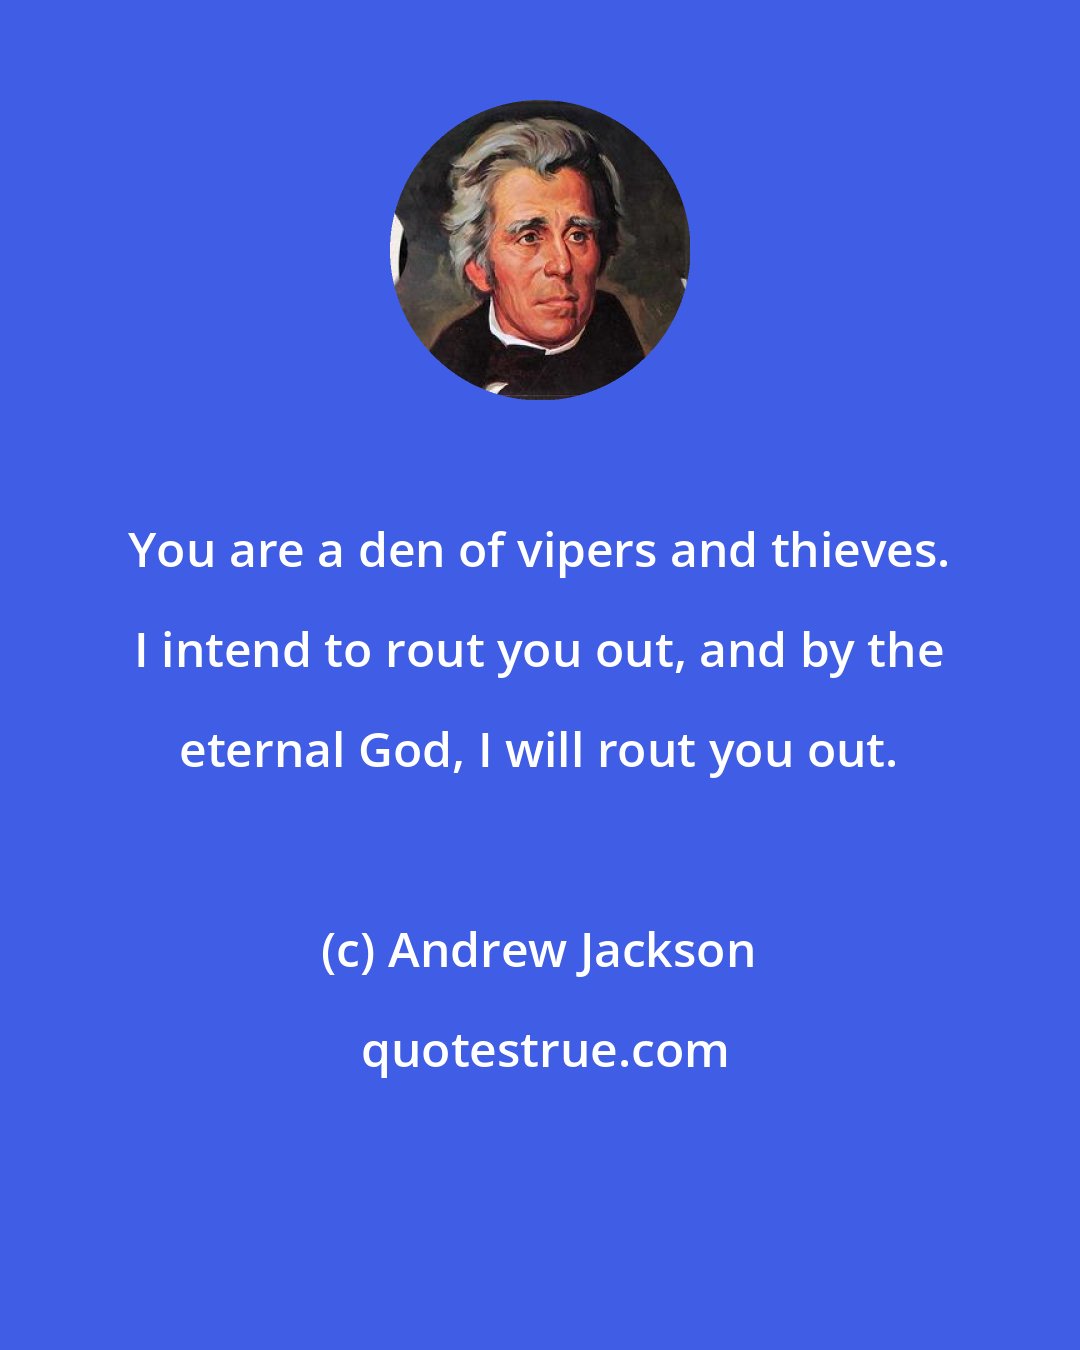 Andrew Jackson: You are a den of vipers and thieves. I intend to rout you out, and by the eternal God, I will rout you out.